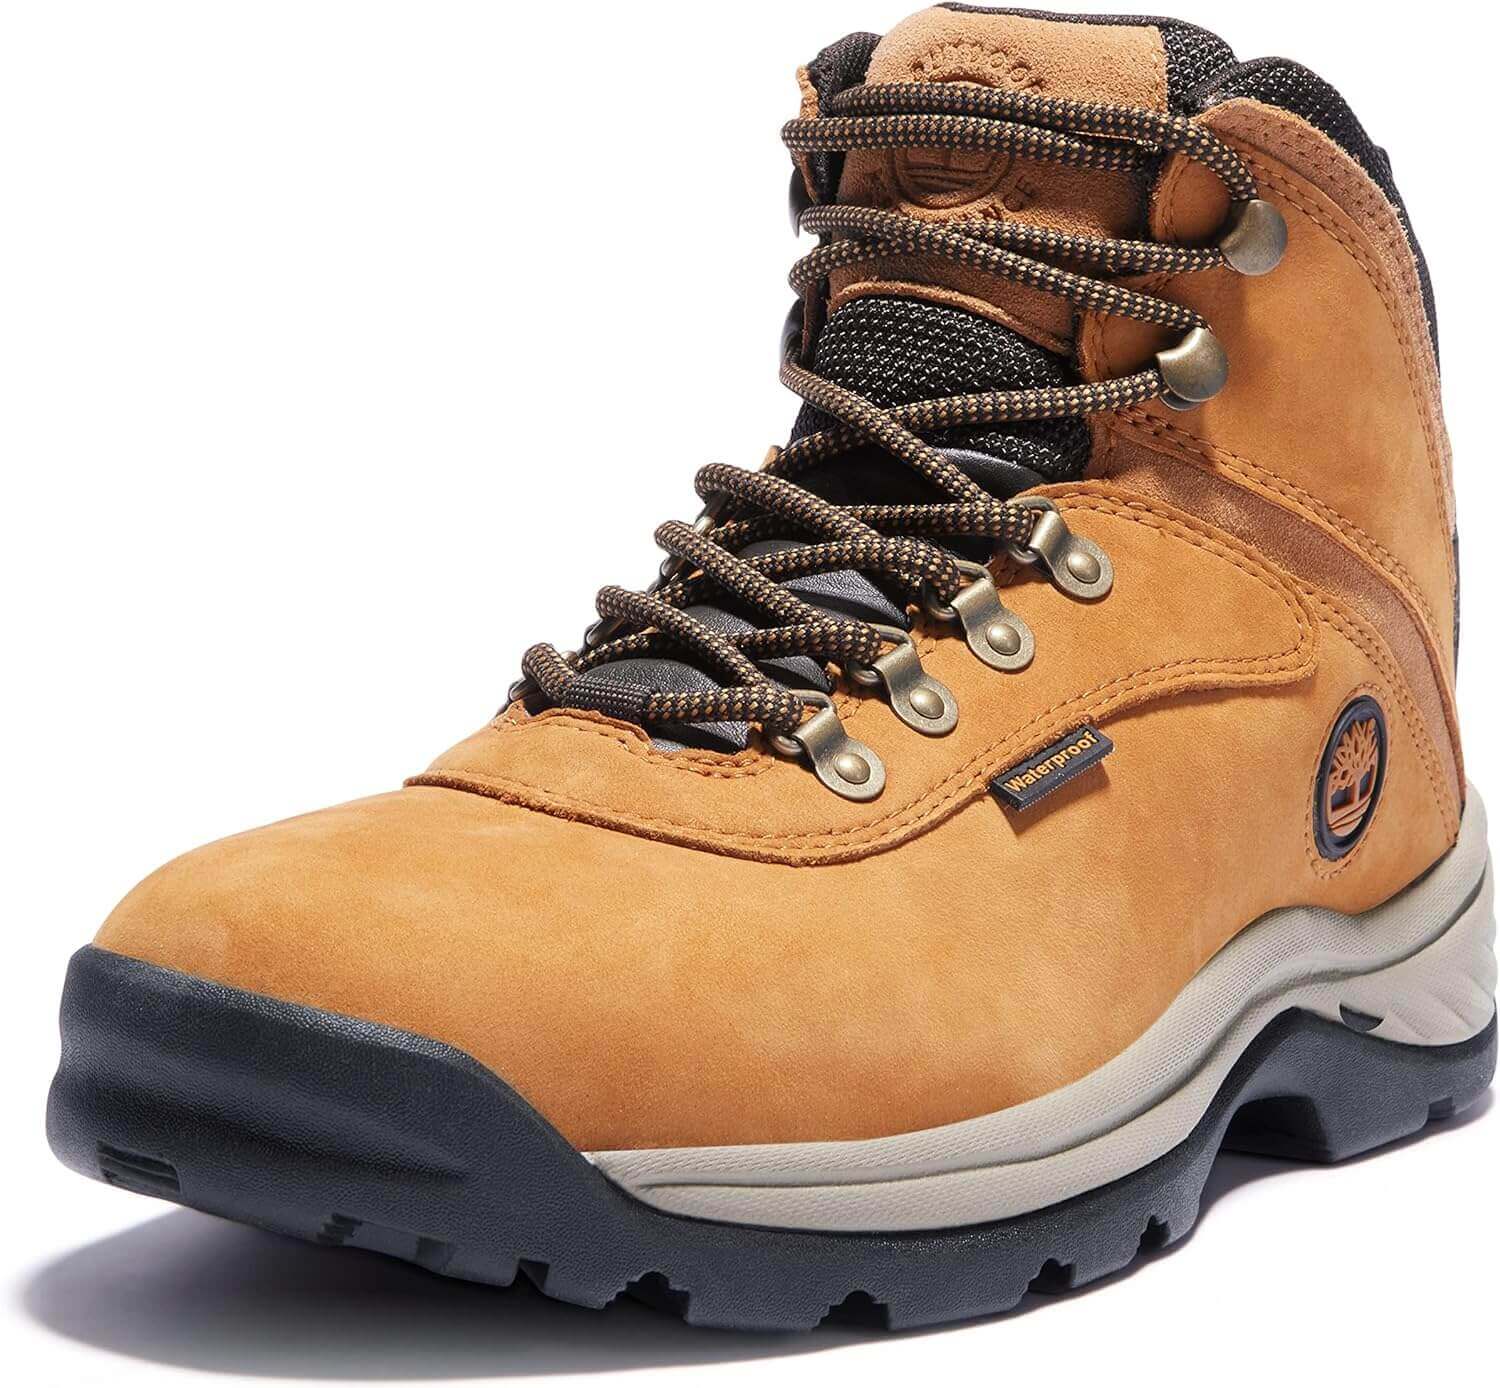 Shop The Latest >Men's White Ledge Mid Waterproof Hiking Boot > *Only $107.99*> From The Top Brand > *Timberlandl* > Shop Now and Get Free Shipping On Orders Over $45.00 >*Shop Earth Foot*